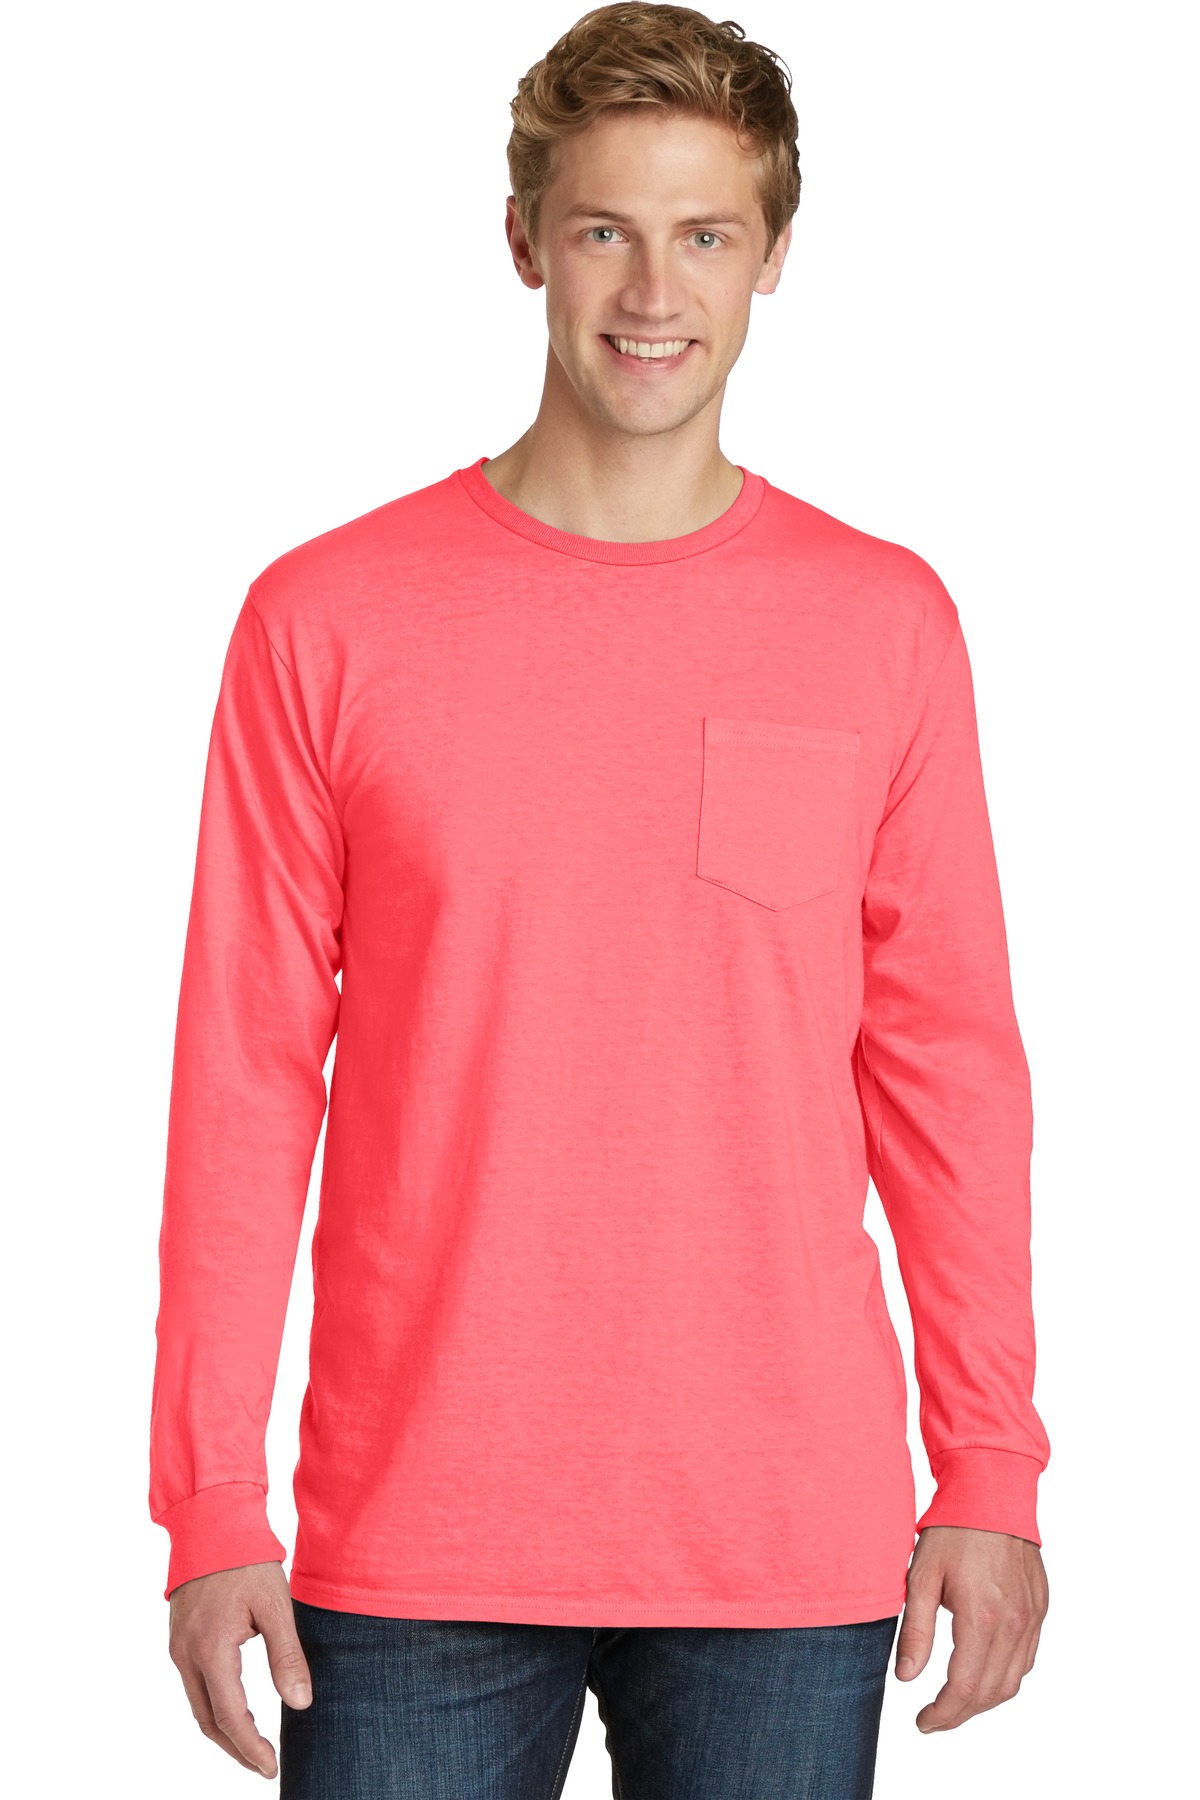 click to view Neon Coral